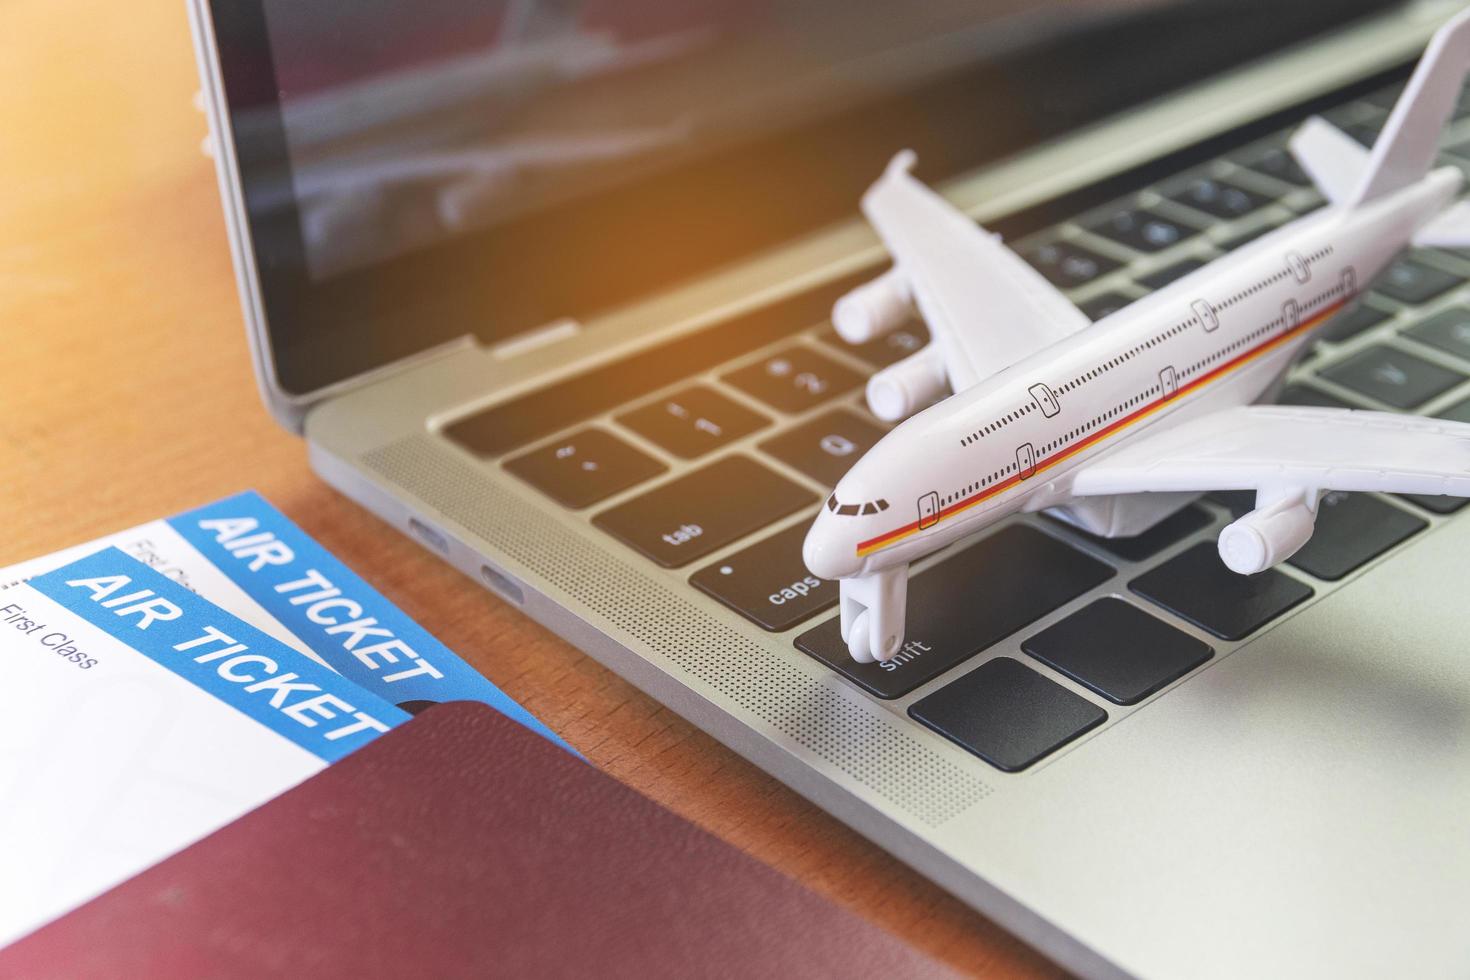 Air tickets and passports near laptop computer and airplane on table. Online ticket booking concept photo